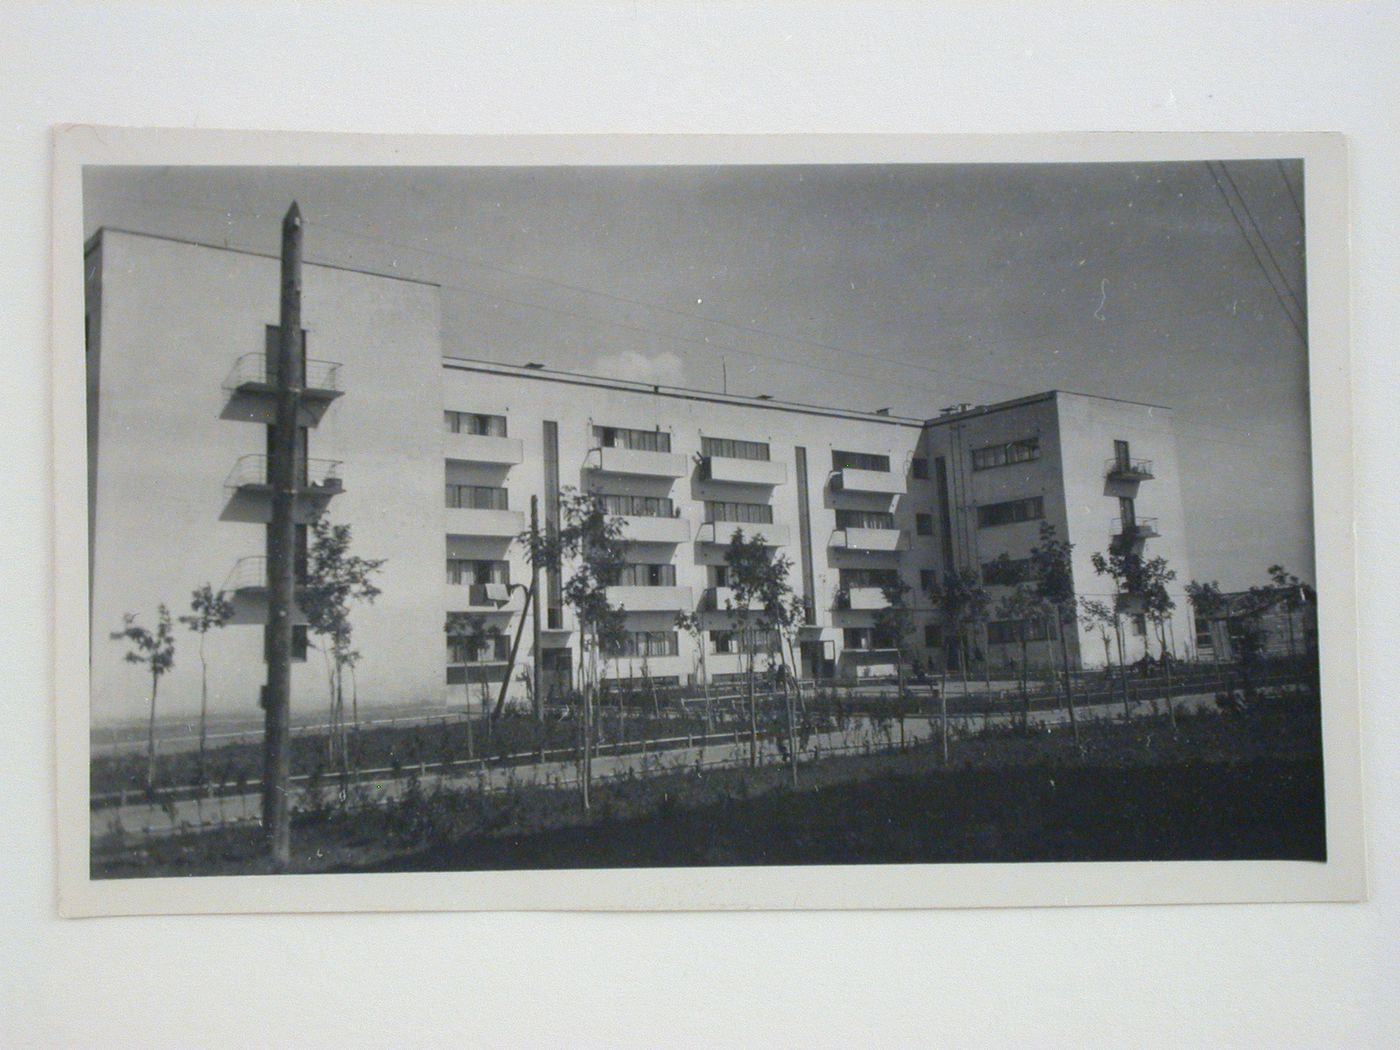 Exterior view of communal housing, Moscow